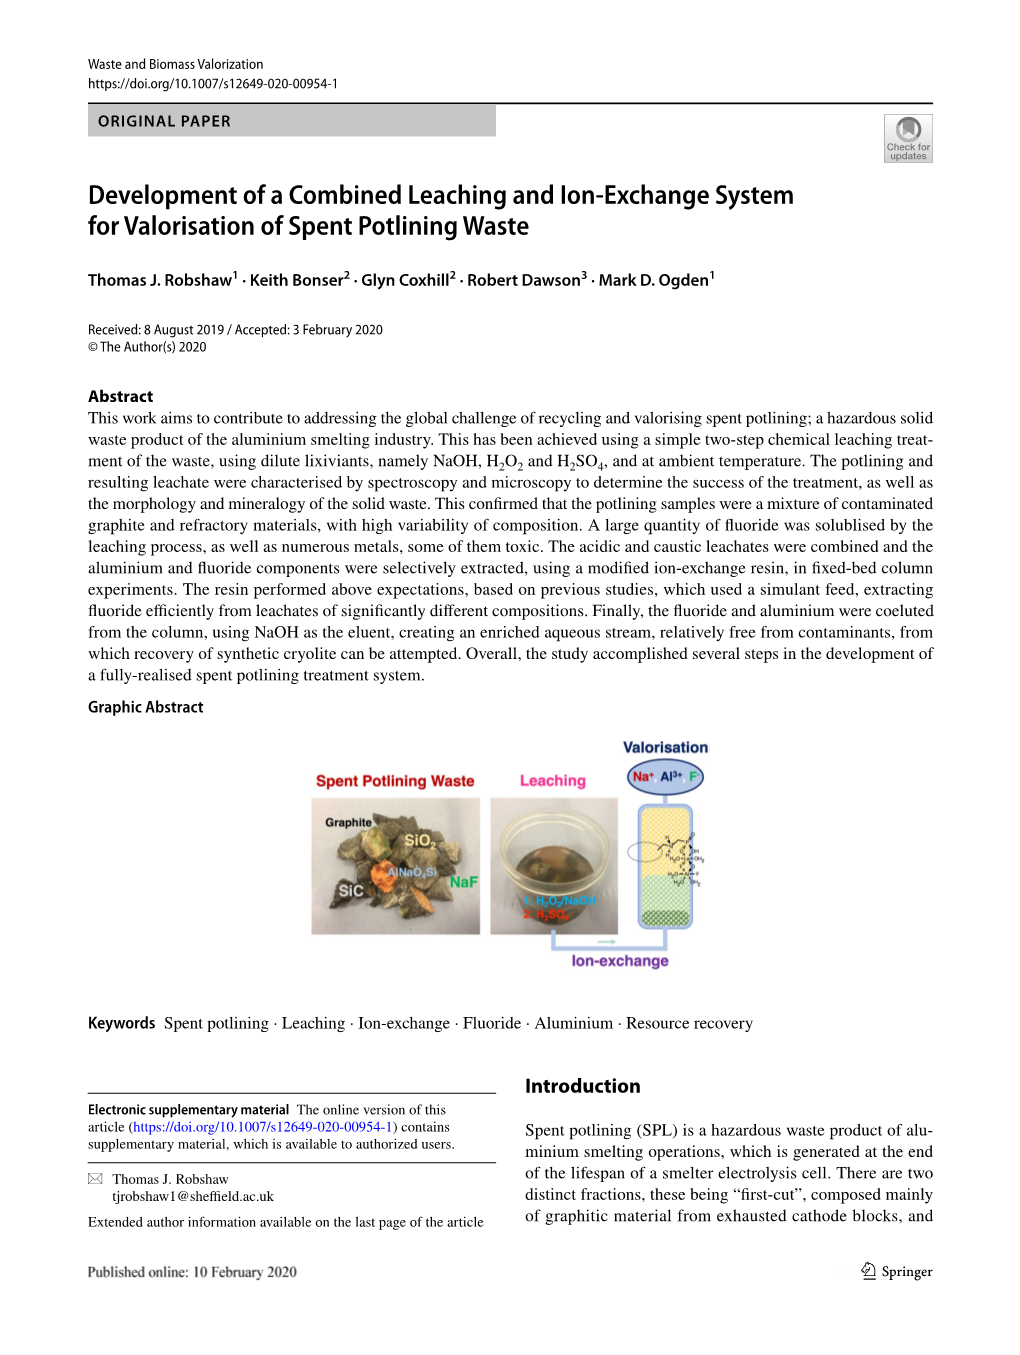 Development of a Combined Leaching and Ion‑Exchange System for Valorisation of Spent Potlining Waste